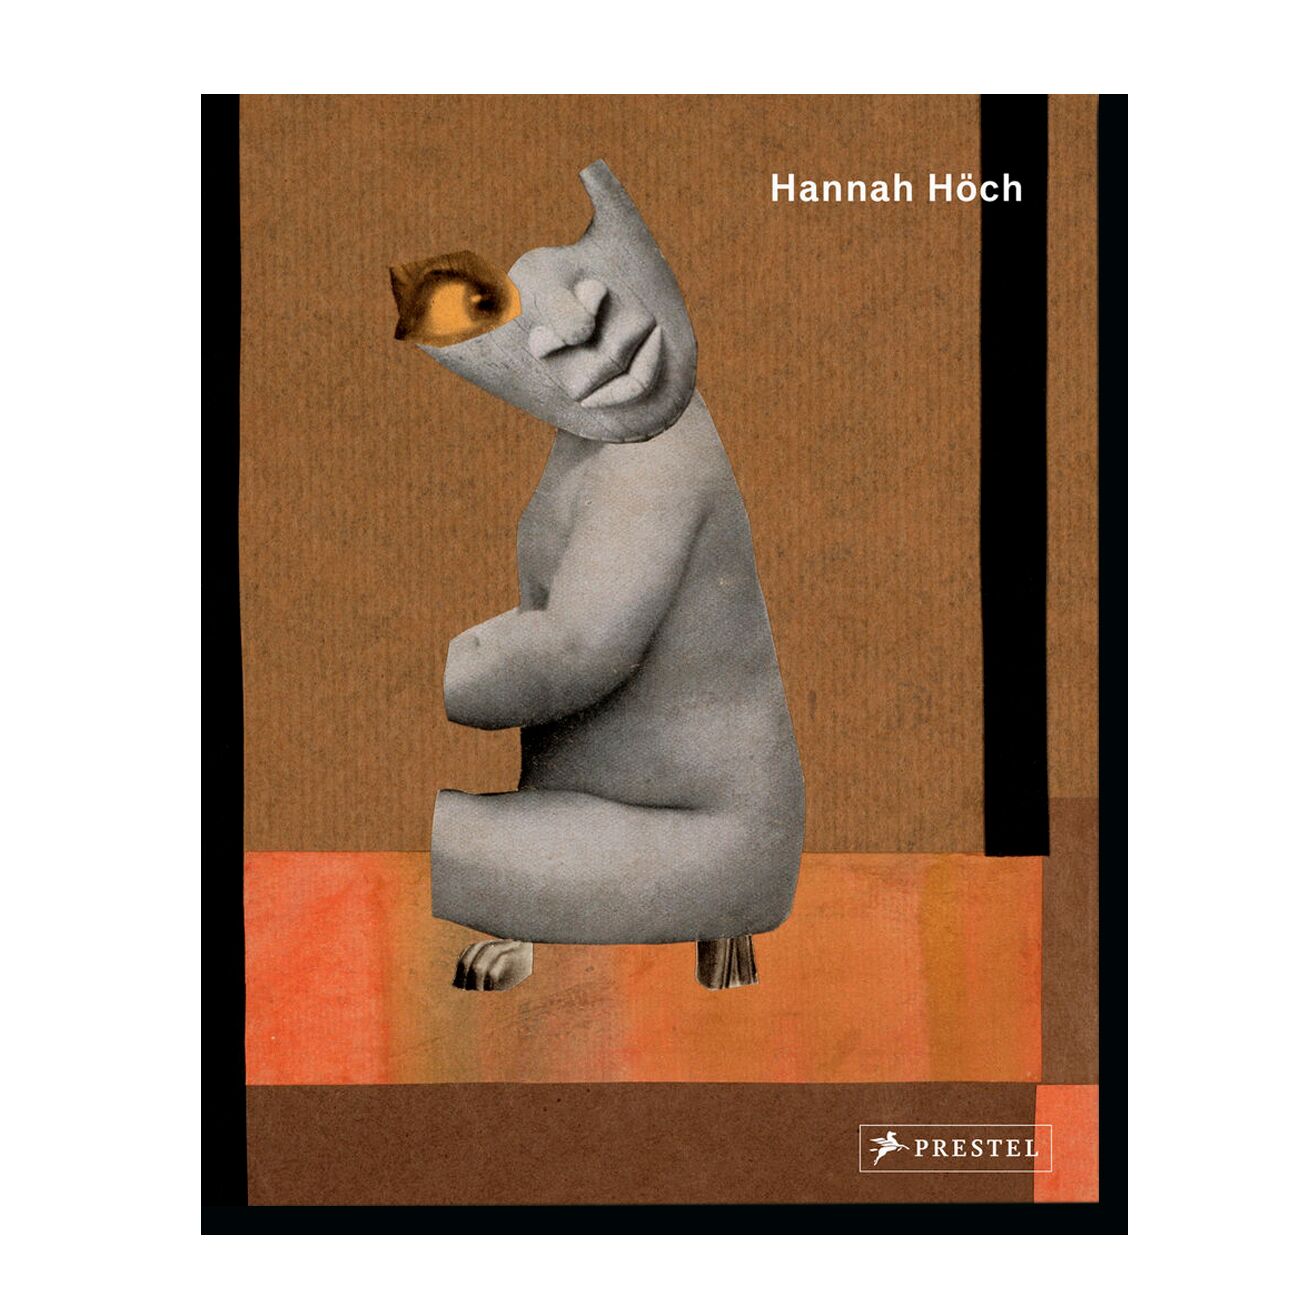 Hannah Hoch: Works on Paper